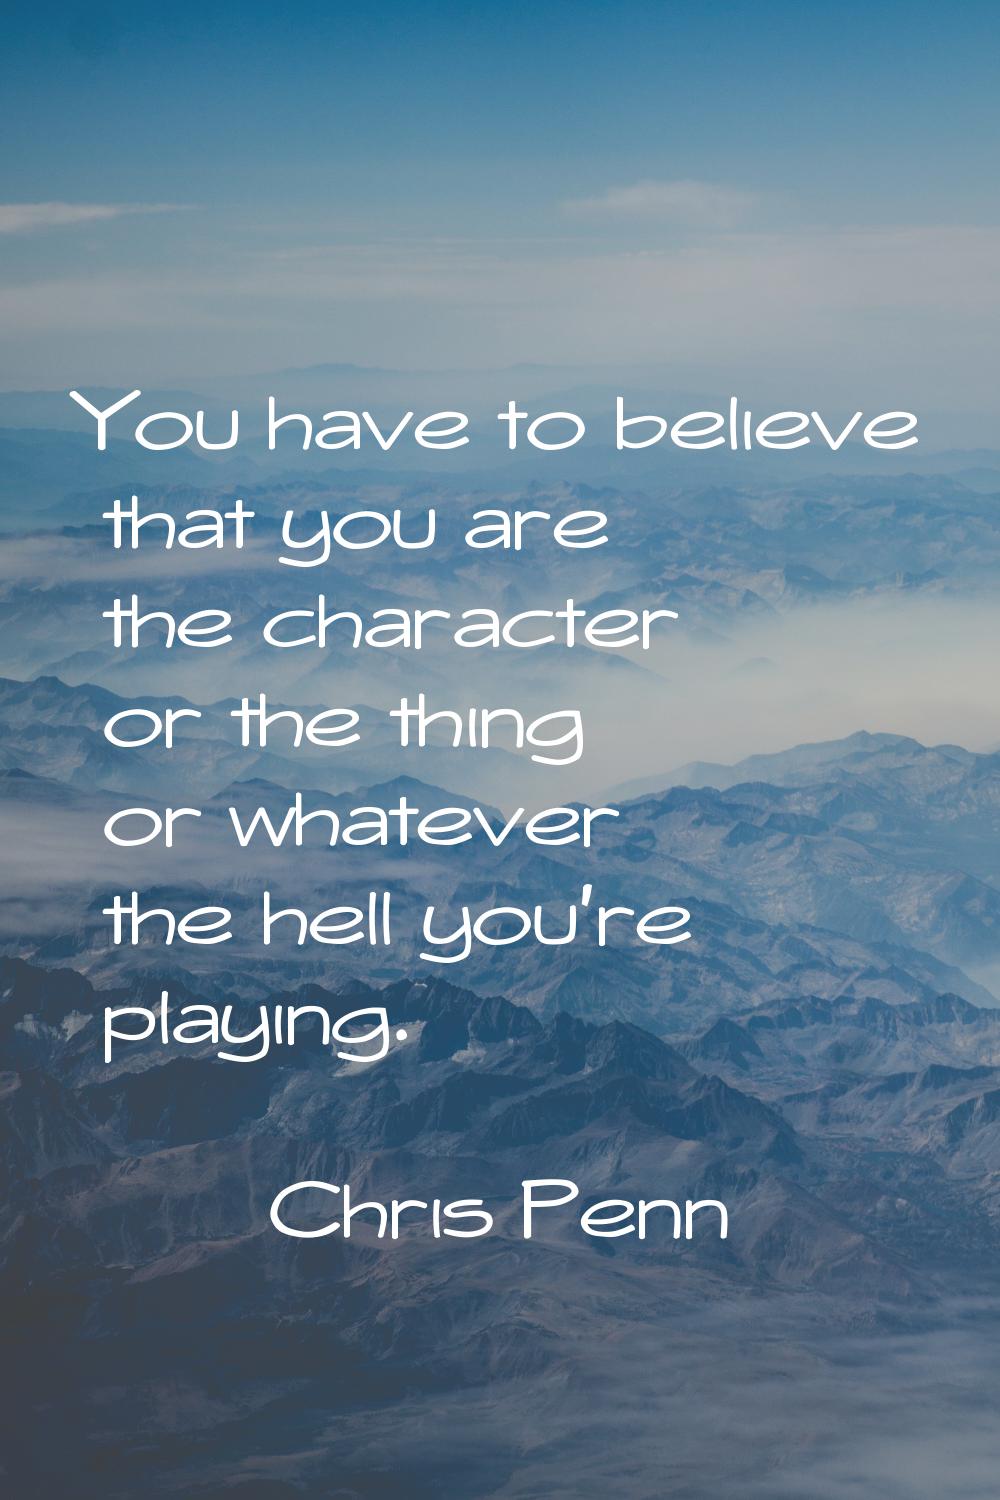 You have to believe that you are the character or the thing or whatever the hell you're playing.